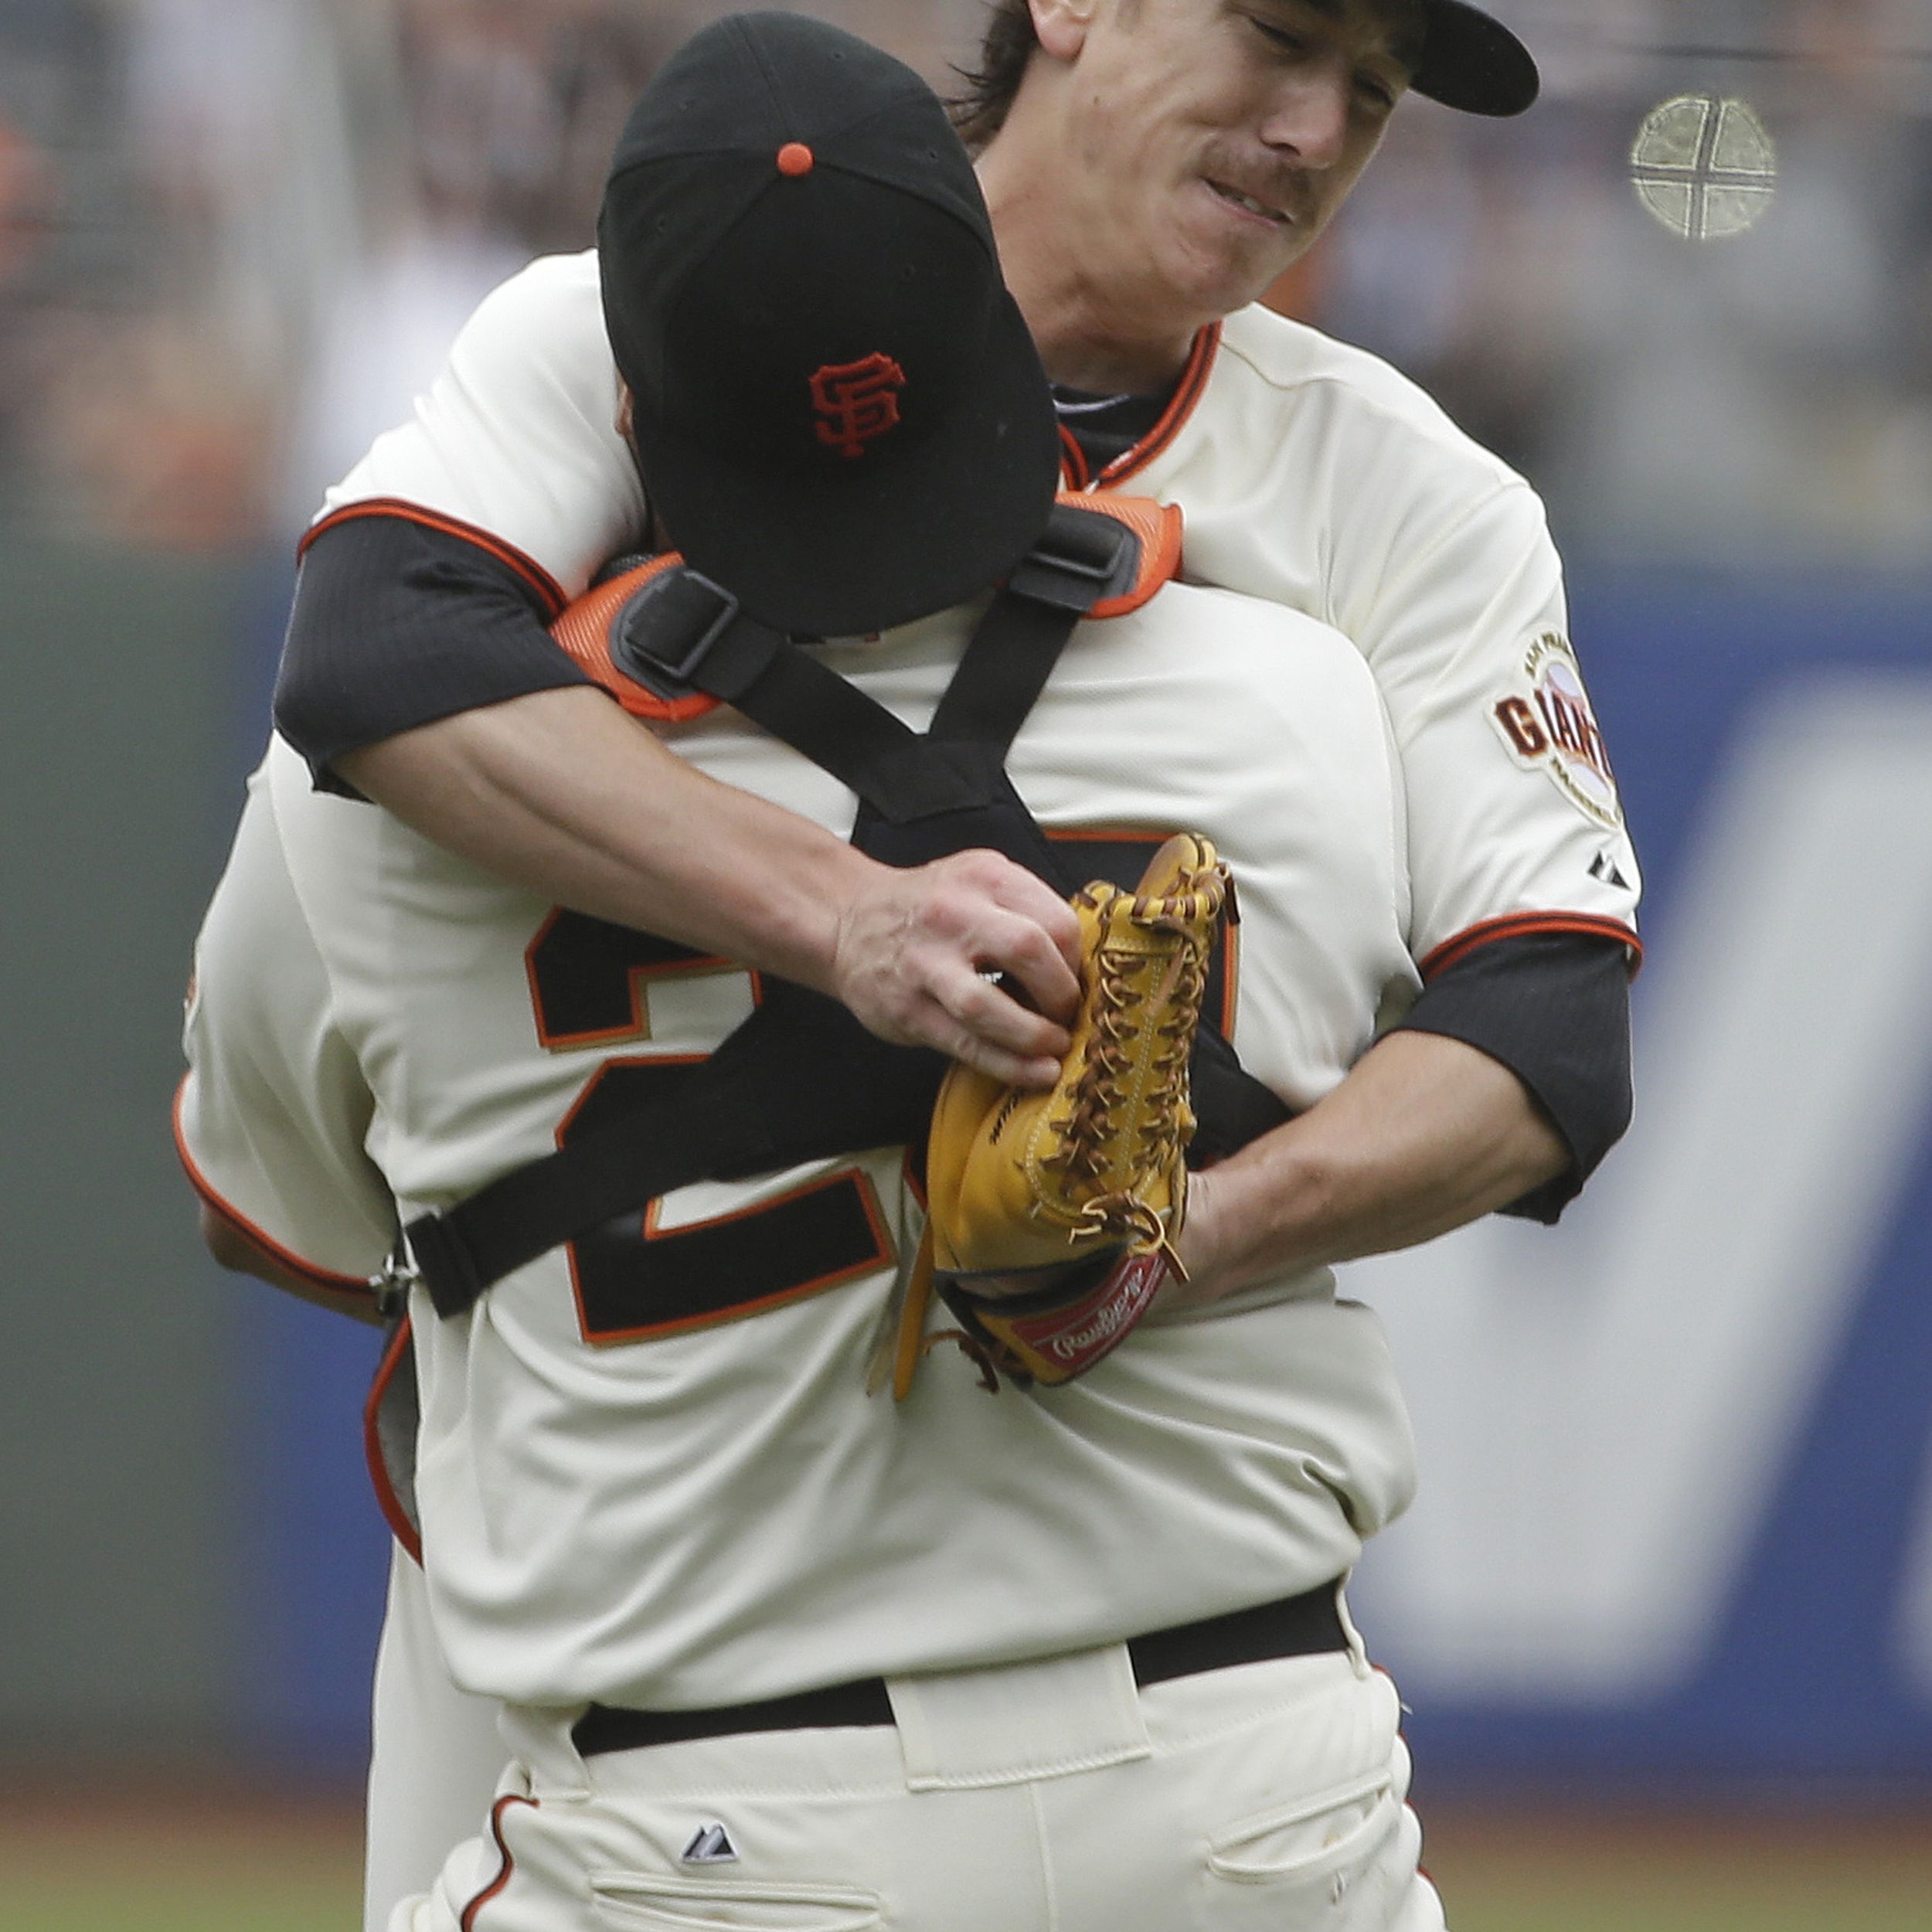 Immediately after throwing a no-hitter, Tim Lincecum put on a U.S. soccer  jersey